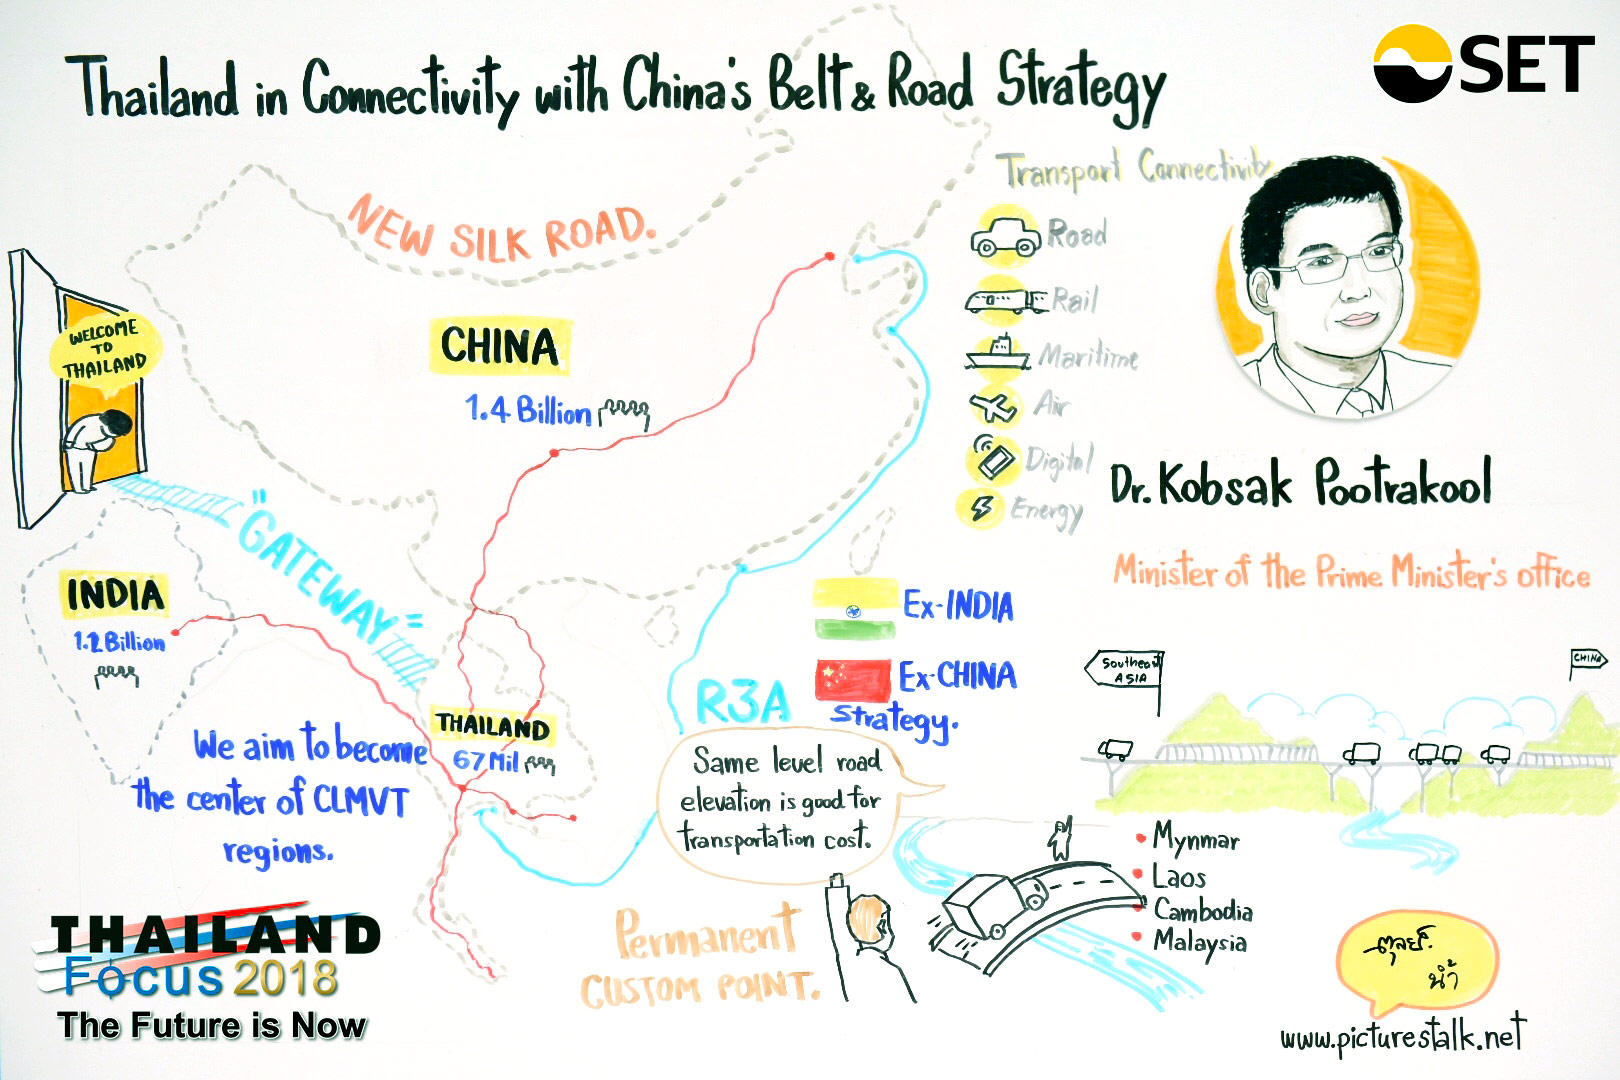 Thailand Focus 2018 - Thailand in Connectivity with China’s Belt and Road Strategy - Dr. Kobsak Pootrakool